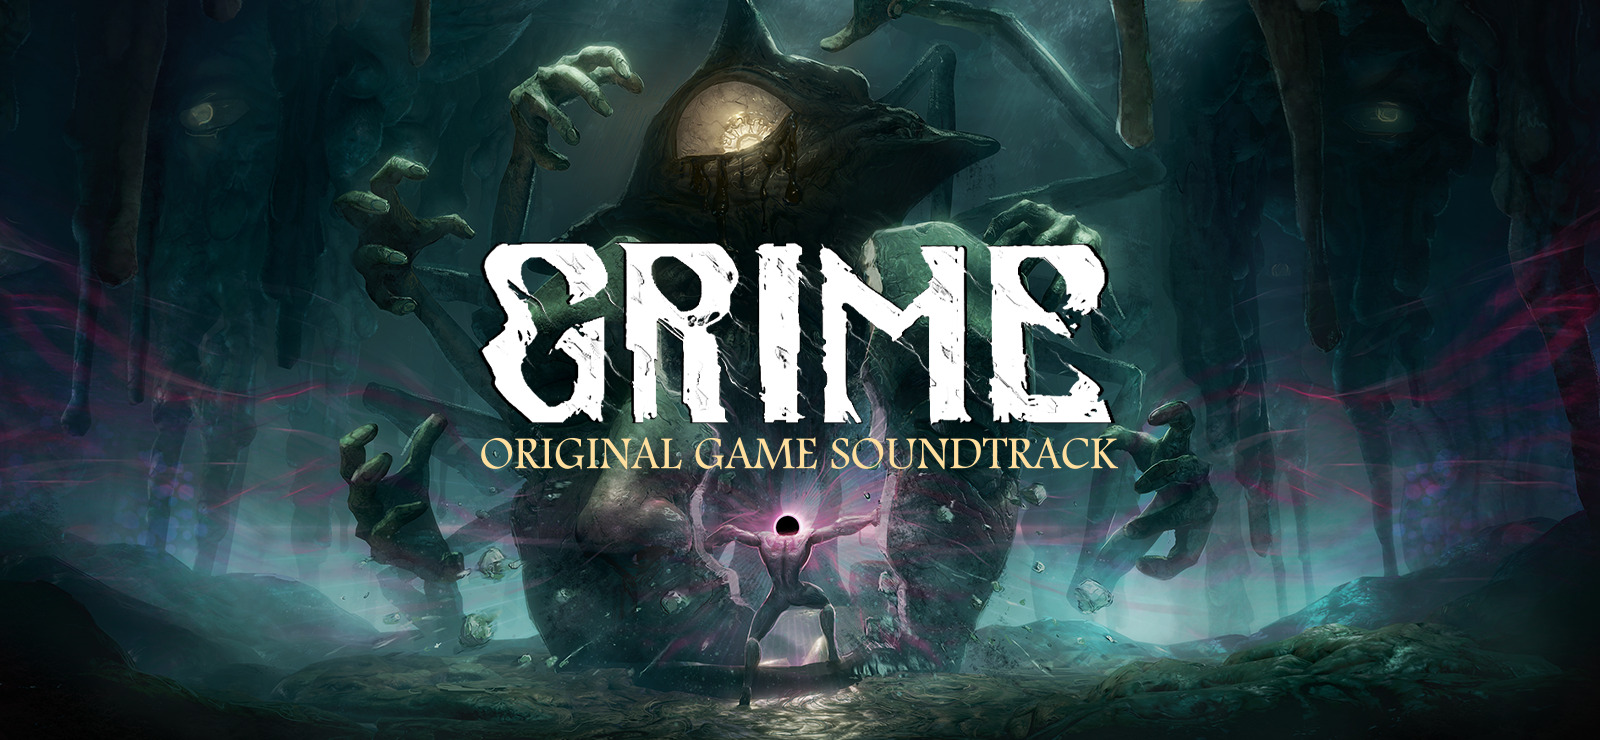 Gone viral игра. Grime game. Grime гнездо мрака. Grime (Video game). Grimes Player of games.